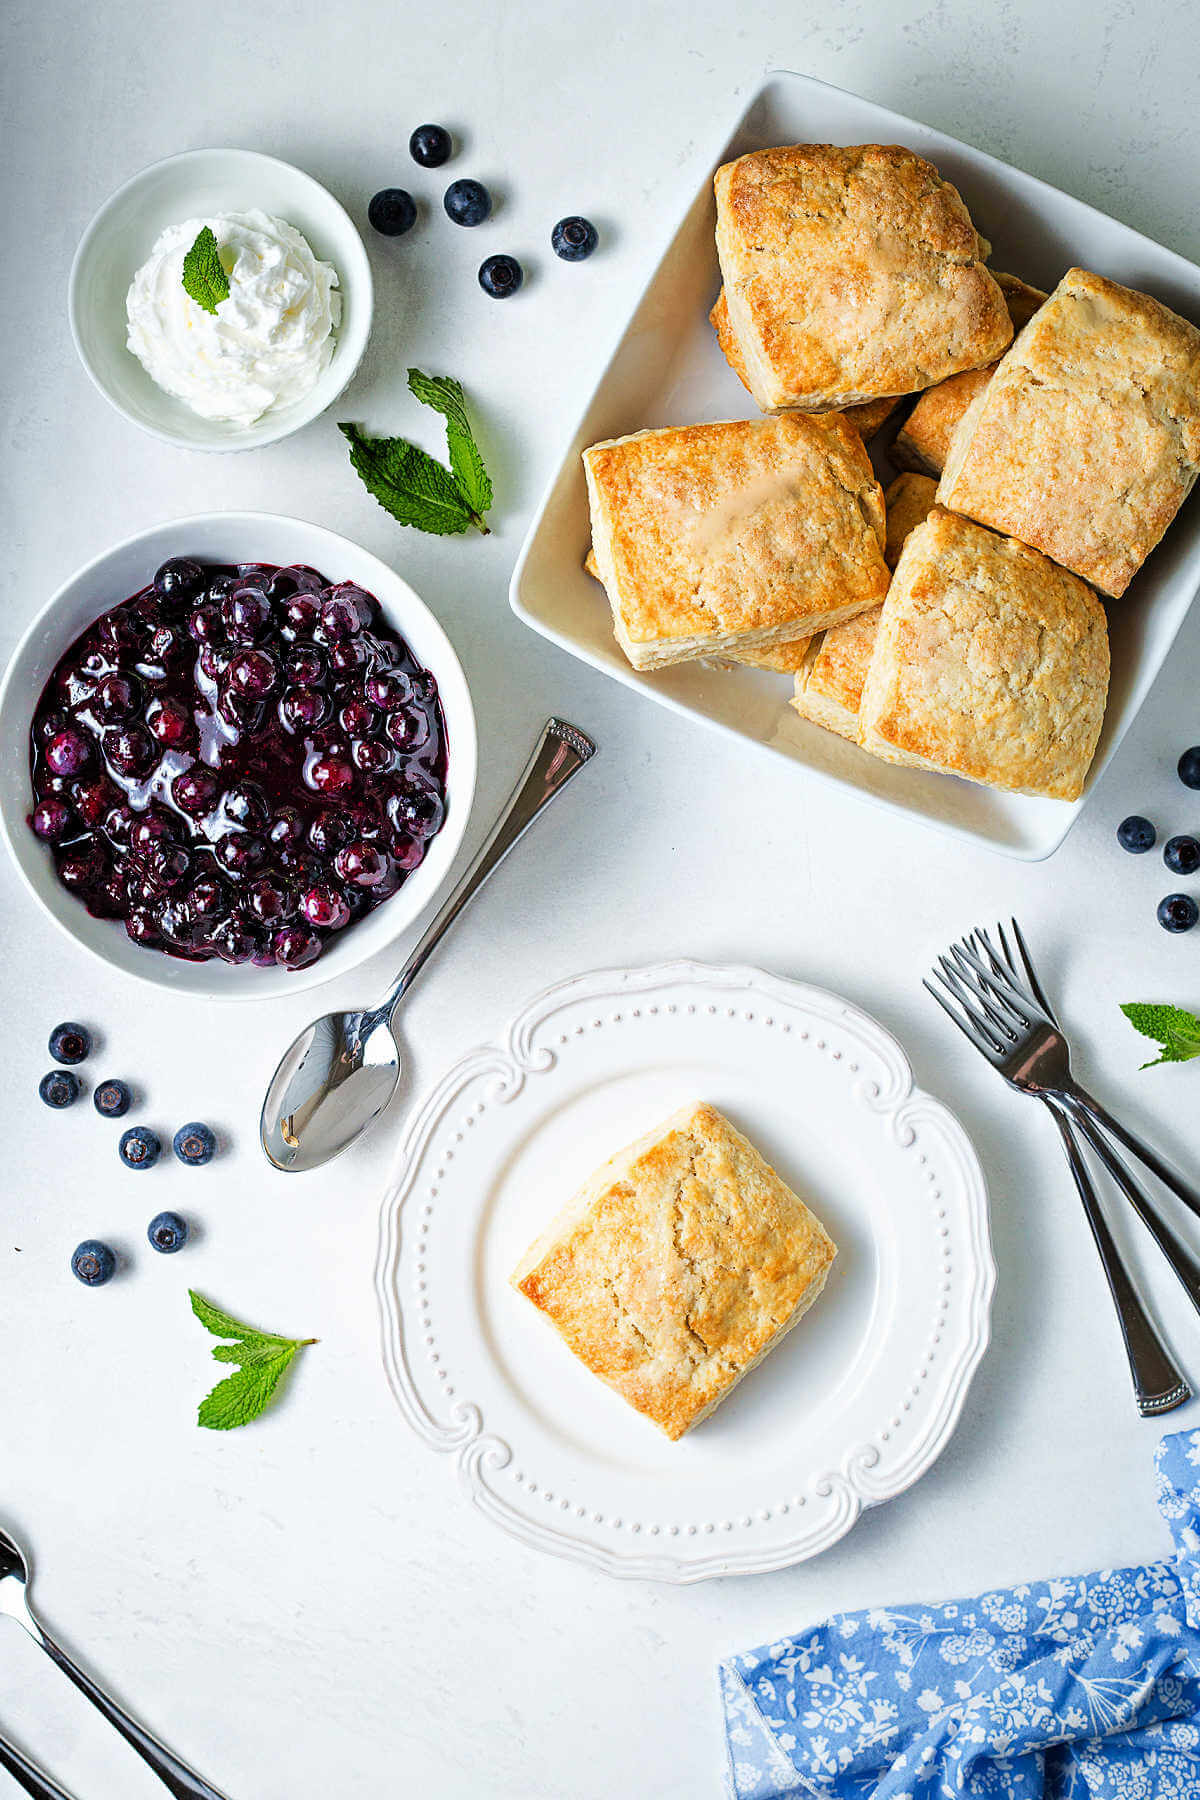 baked shortcakes, a bowl of blueberries, and a bowl of whipped cream on a table.